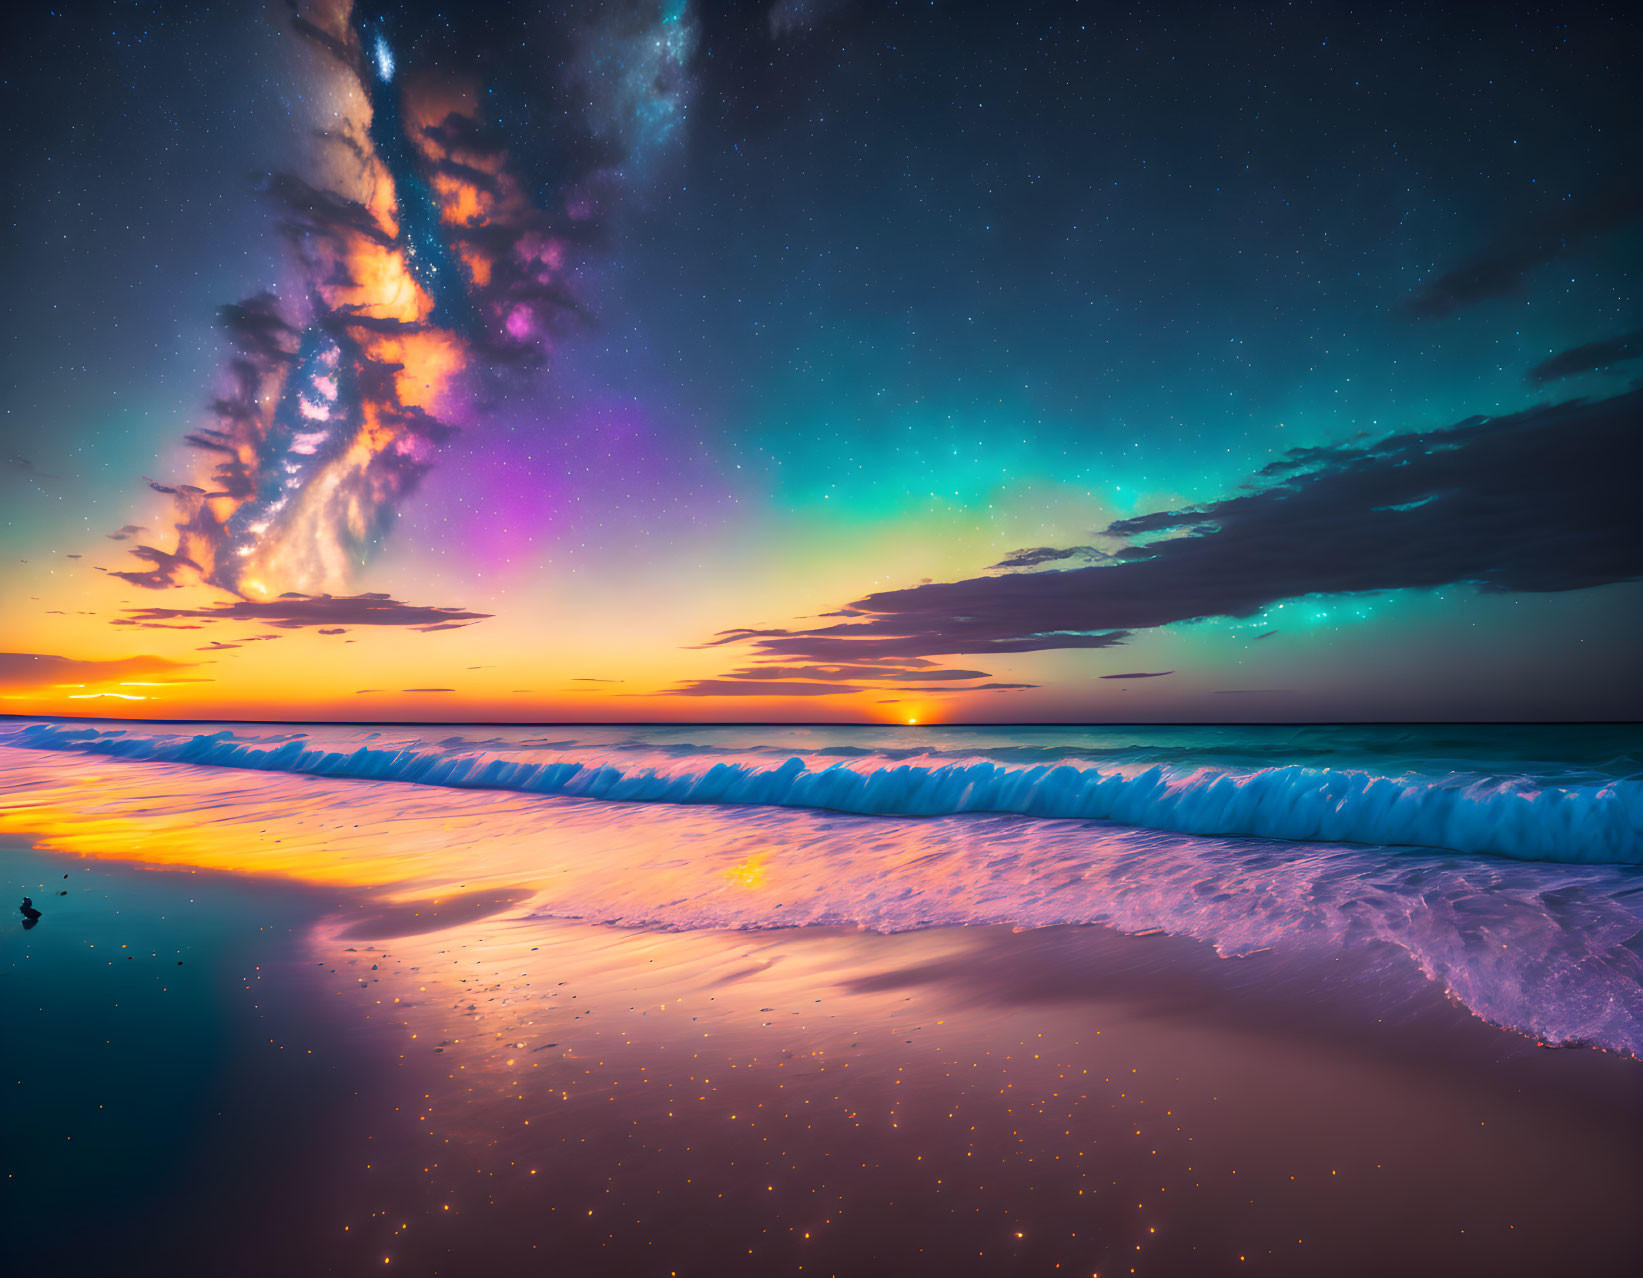 Scenic beach sunset with starry sky and aurora colors above ocean waves